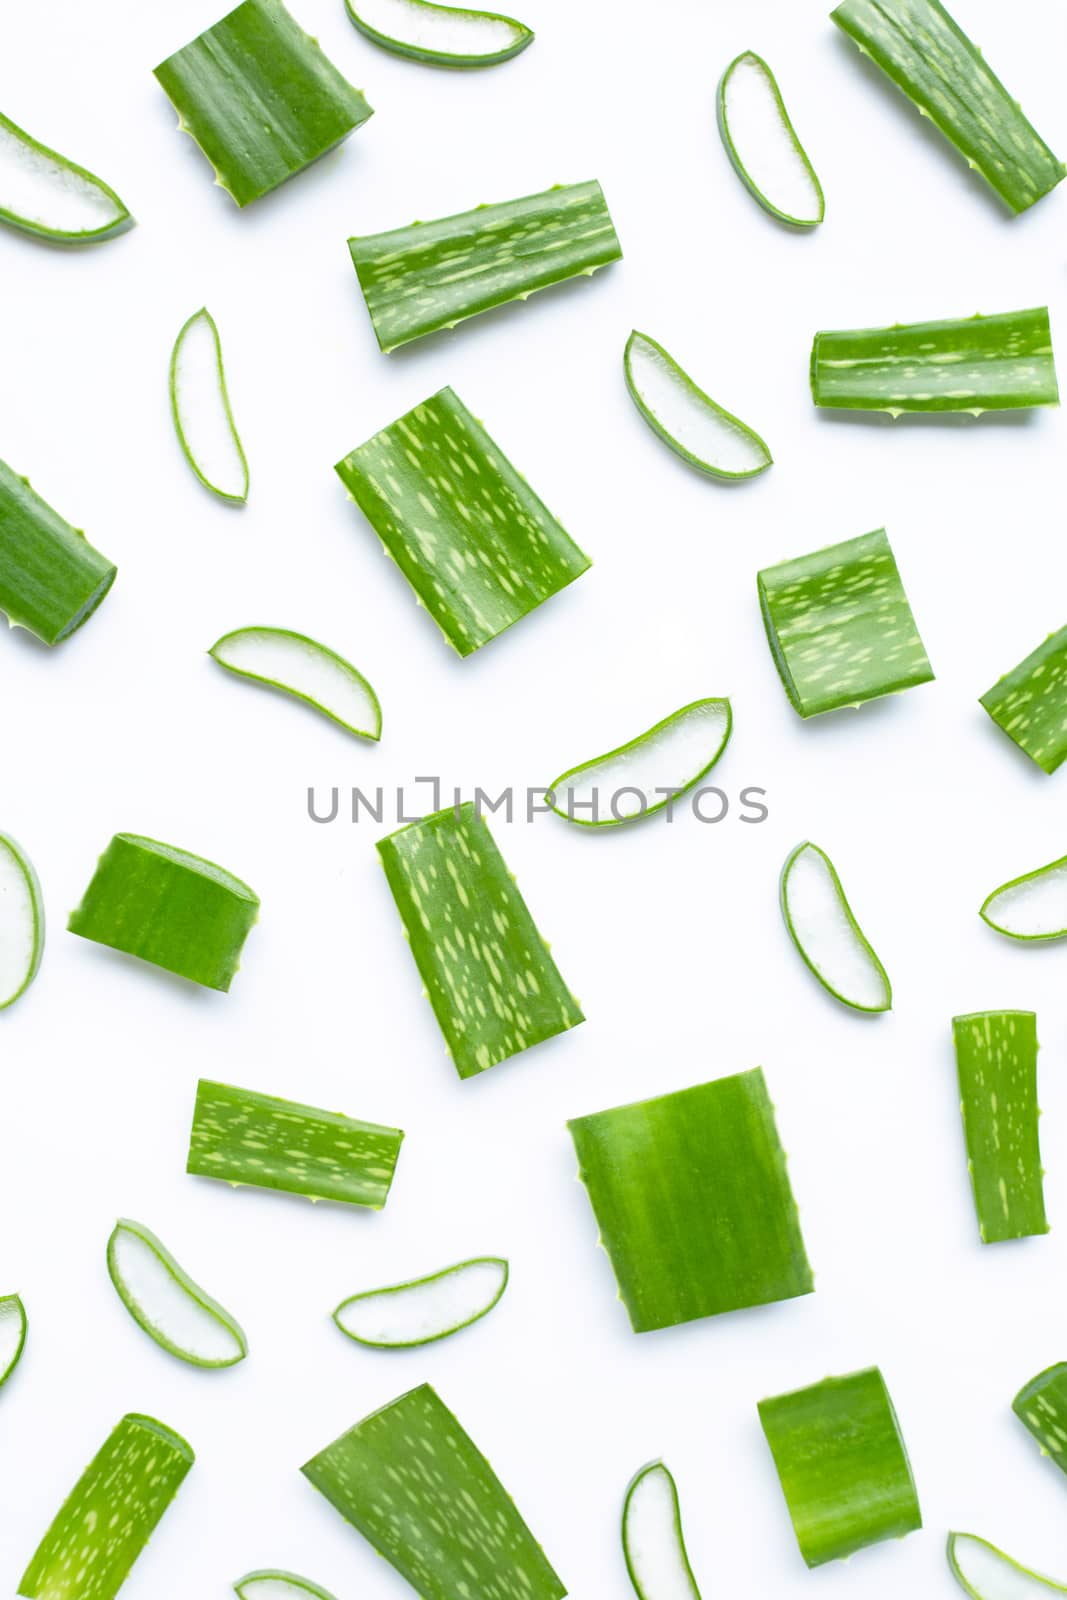 Aloe Vera cut pieces with slices on white background.  by Bowonpat